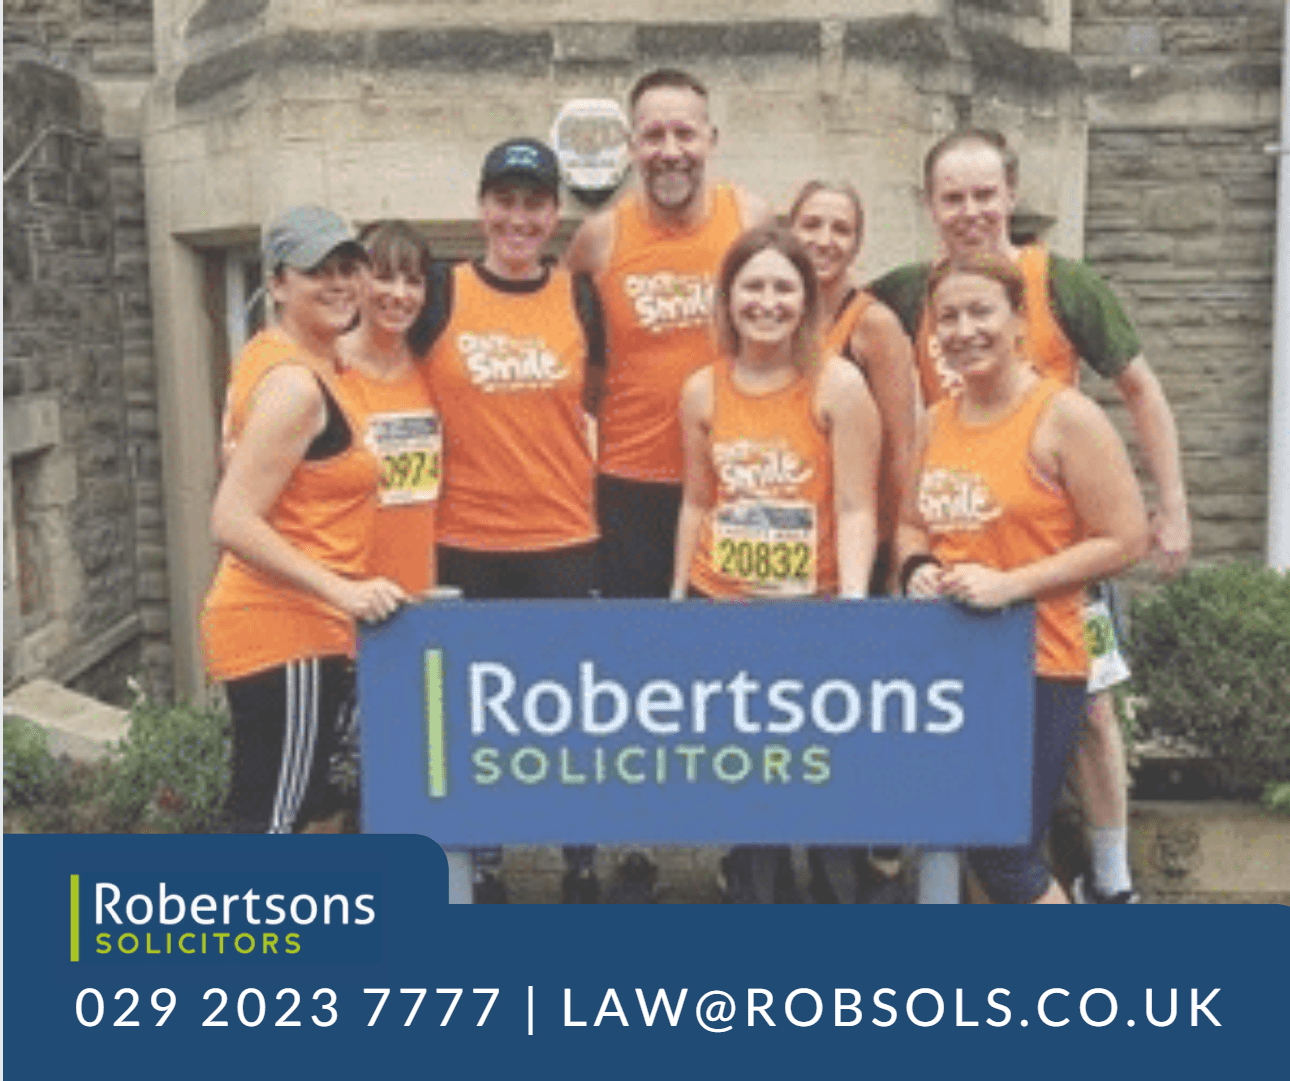 Robertsons Solicitors run the Cardiff Half Marathon For Charity